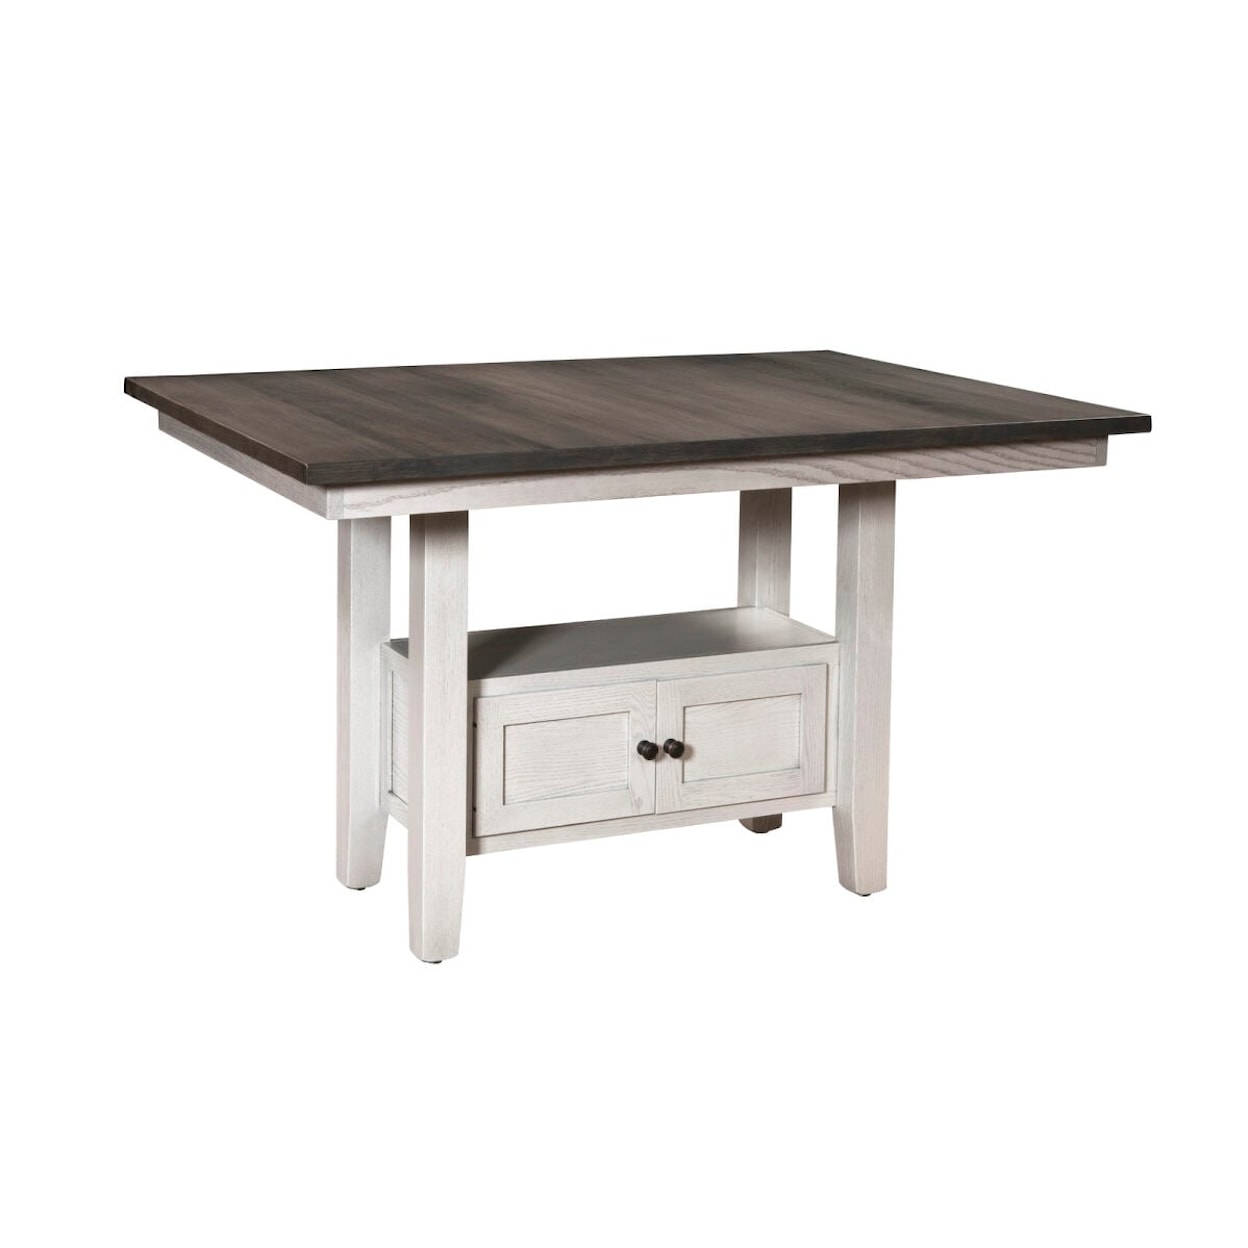 Trailway Wood Catskill Mountain Counter Height Amish Table